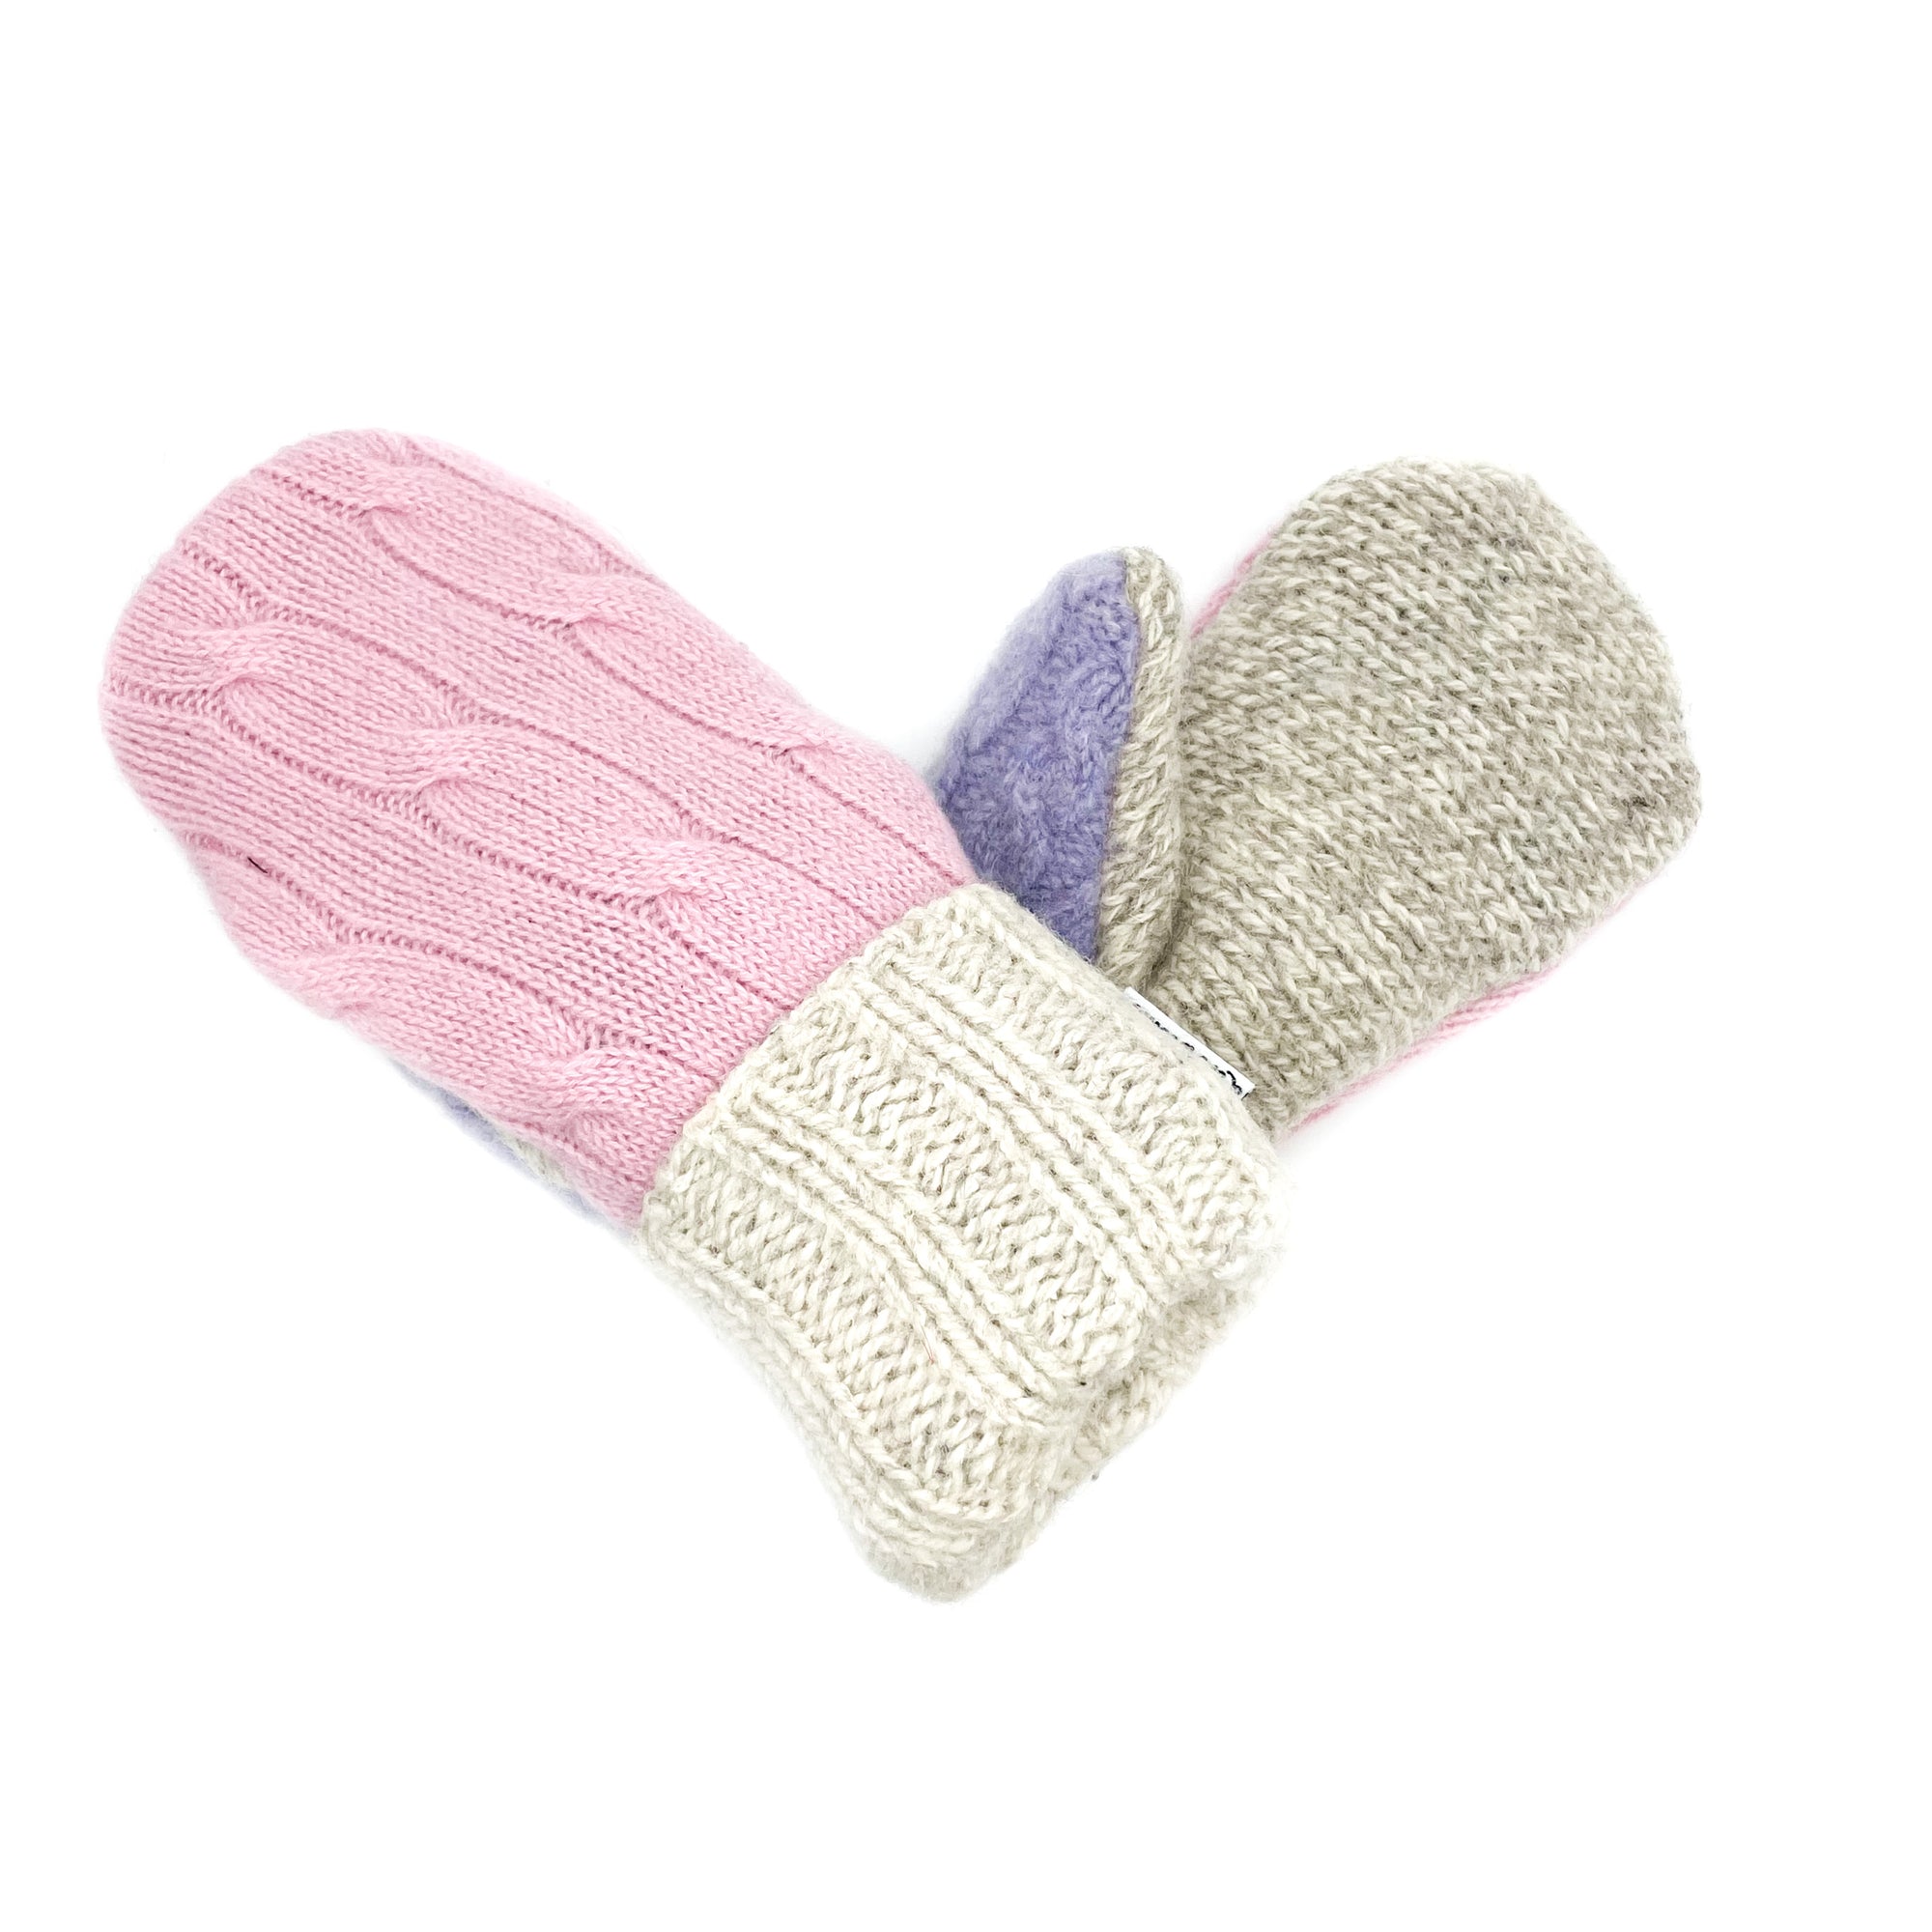 Large Kid's Wool Sweater Mittens | Ray of Sunshine